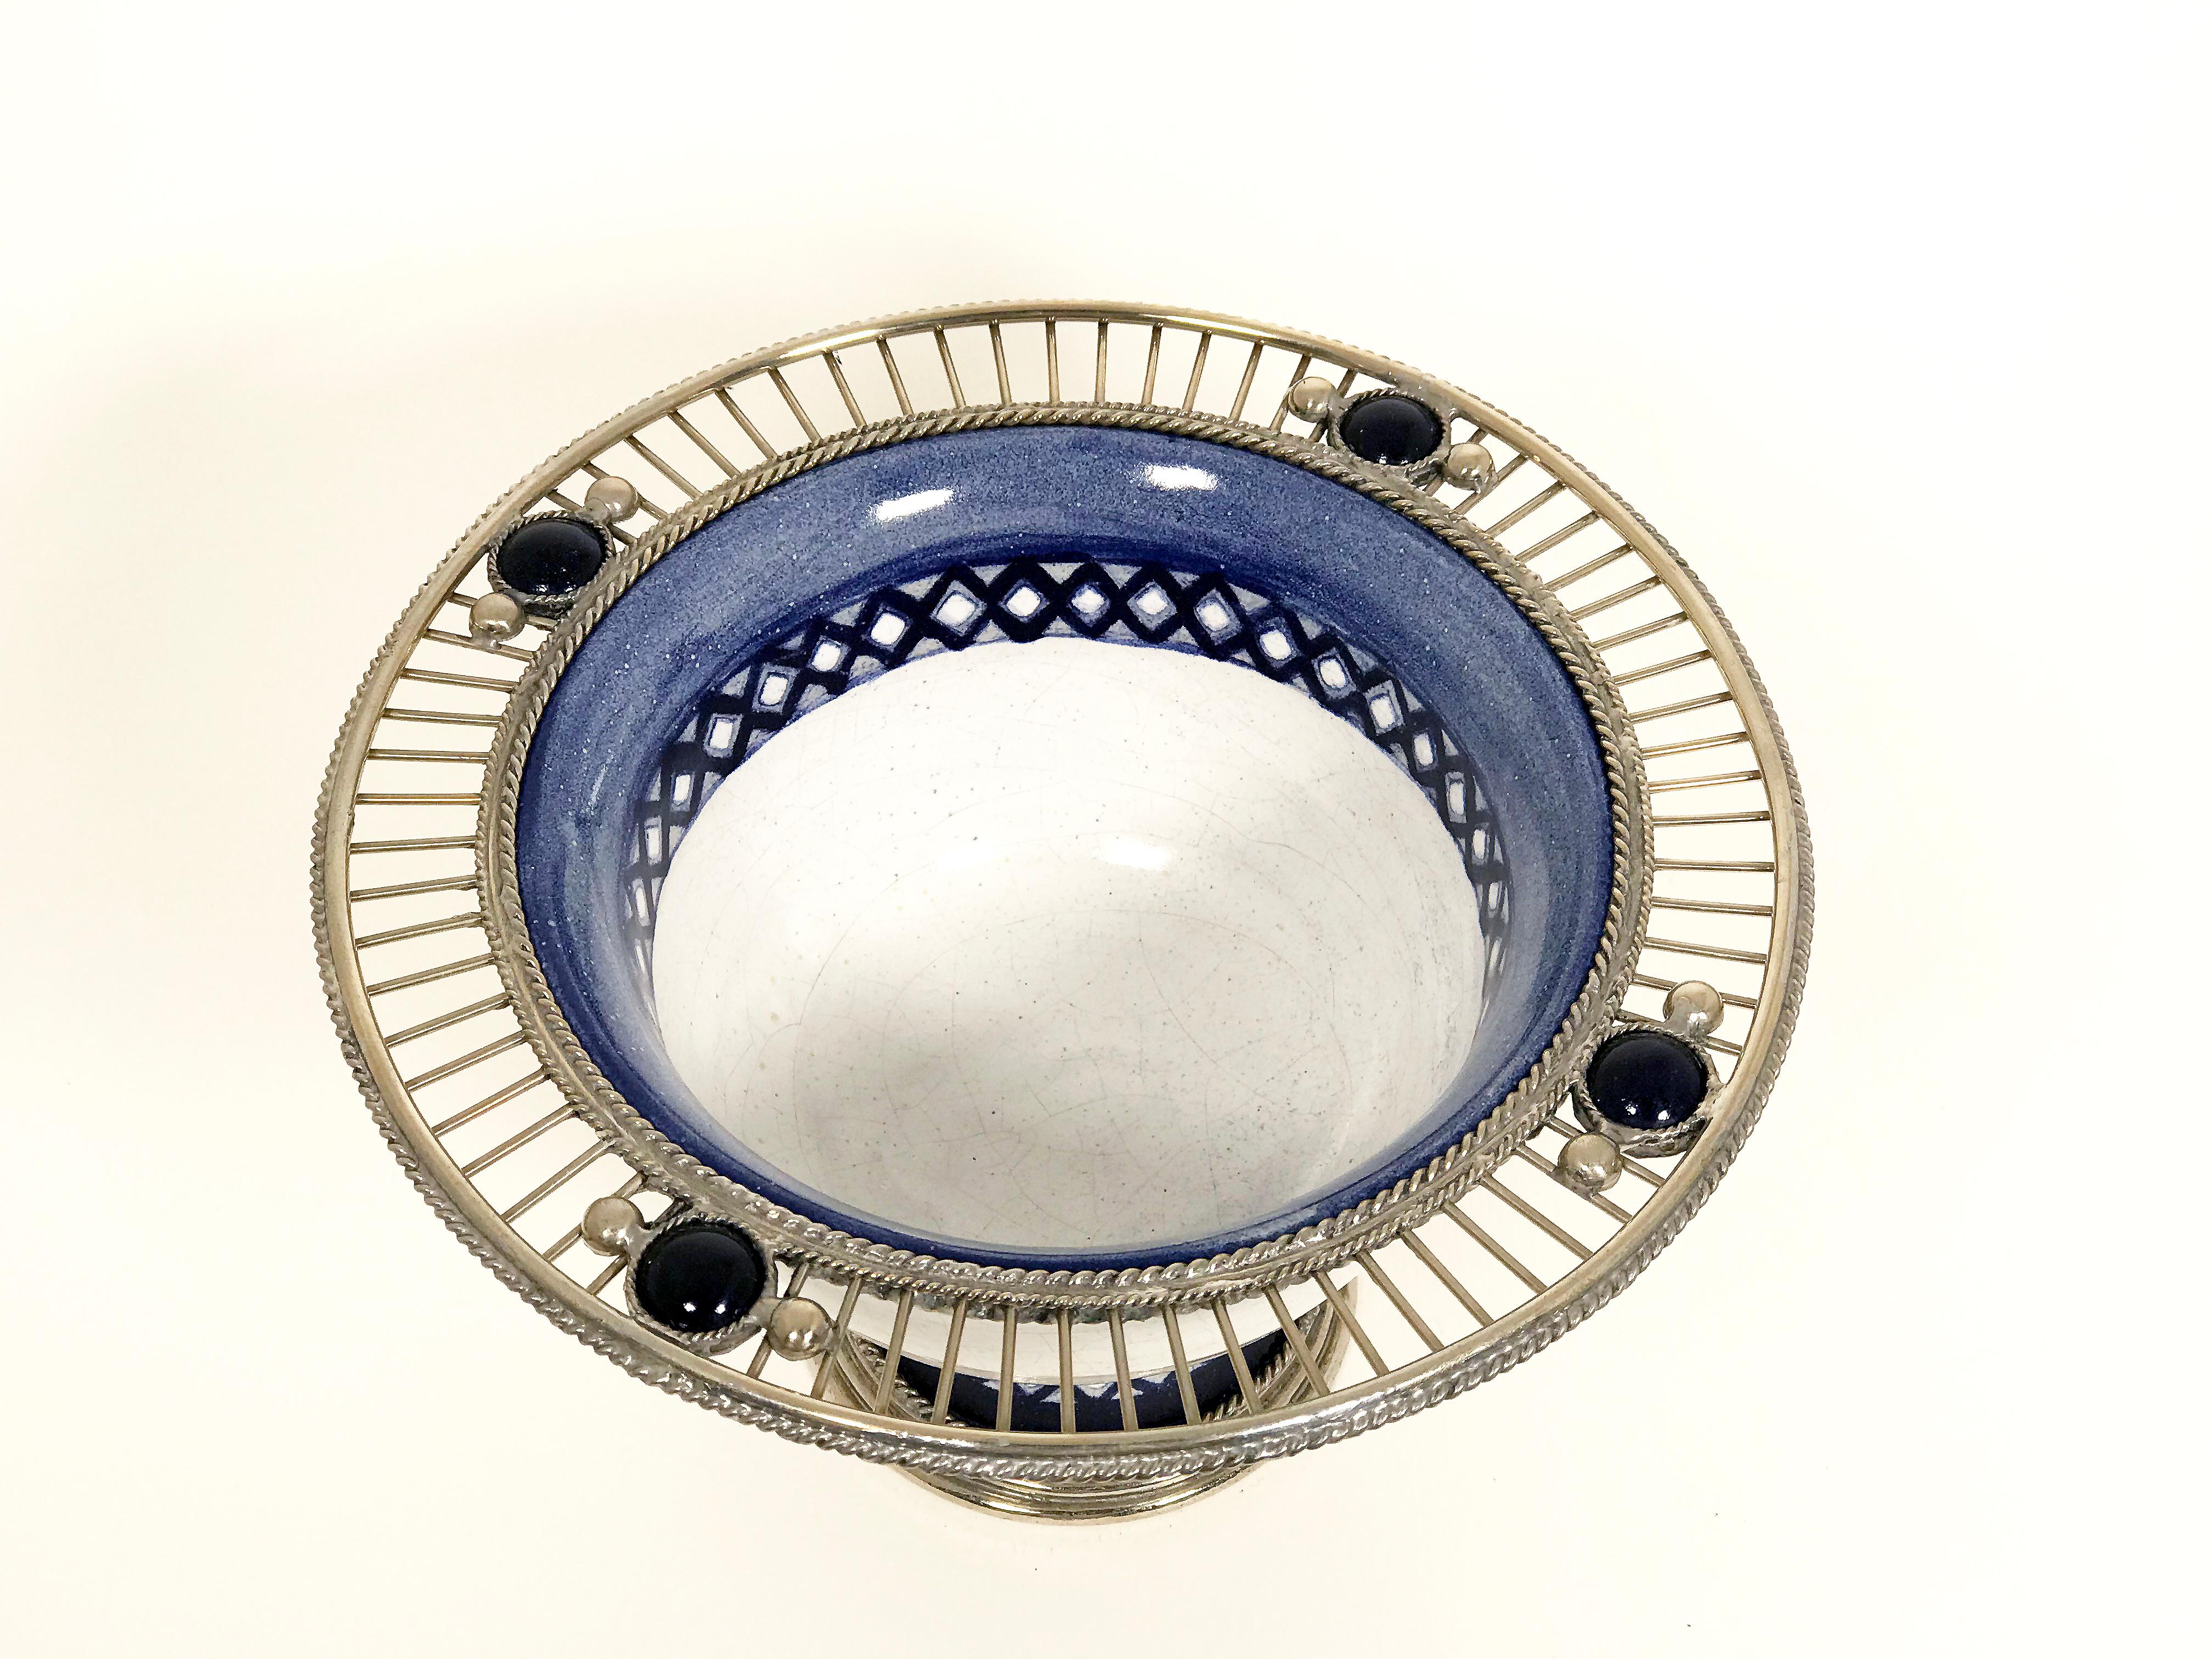 Always unique pieces is what you are going to hear about Jesus Guerrero Santo's work, all the pieces are handmade and created one by one it takes months to produce each peace.
This Ceramica and white metal (alpaca) bowl centrepiece, was created in